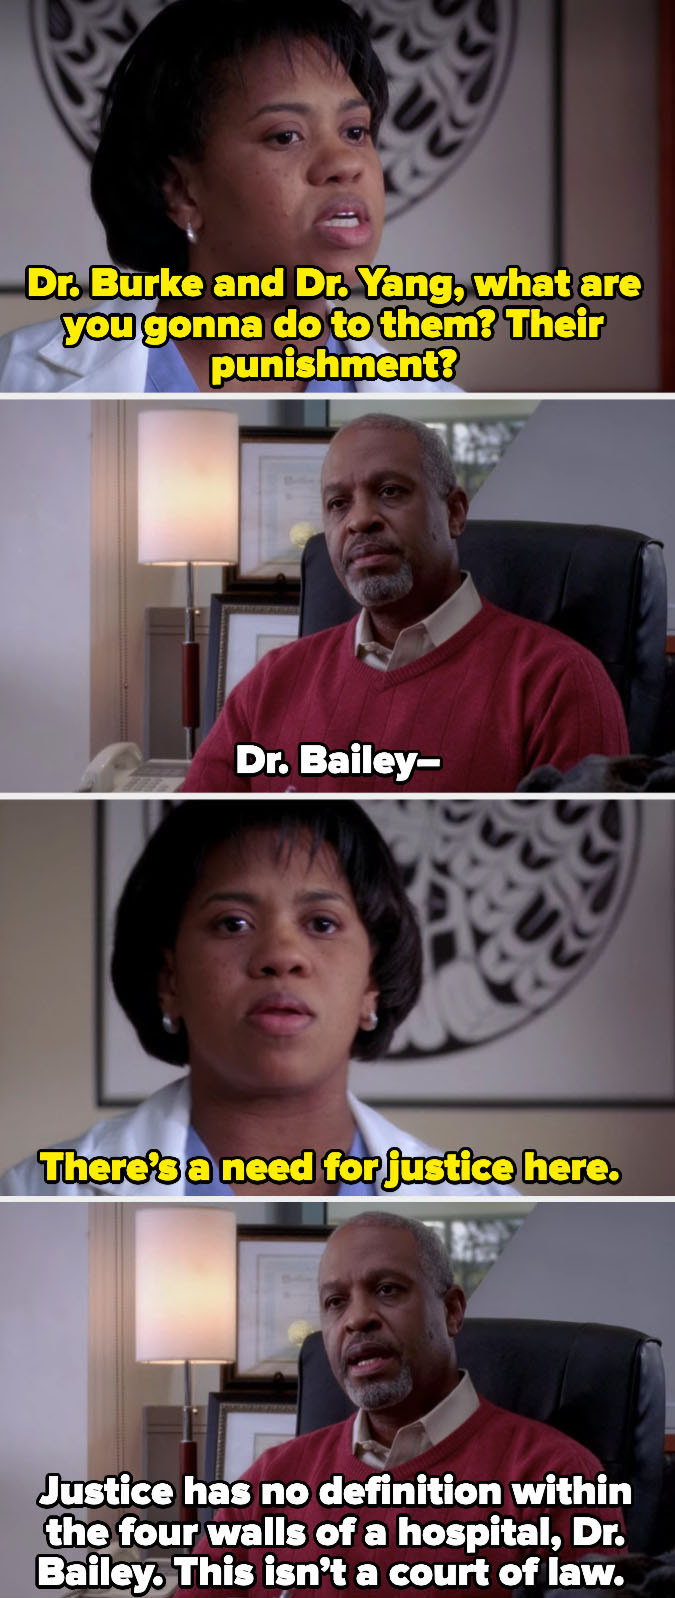 Dr. Bailey asking Dr. Webber what their punishment will be and Dr. Webber revealing that there will be no &quot;justice&quot; for Dr. Yang and Dr. Burke